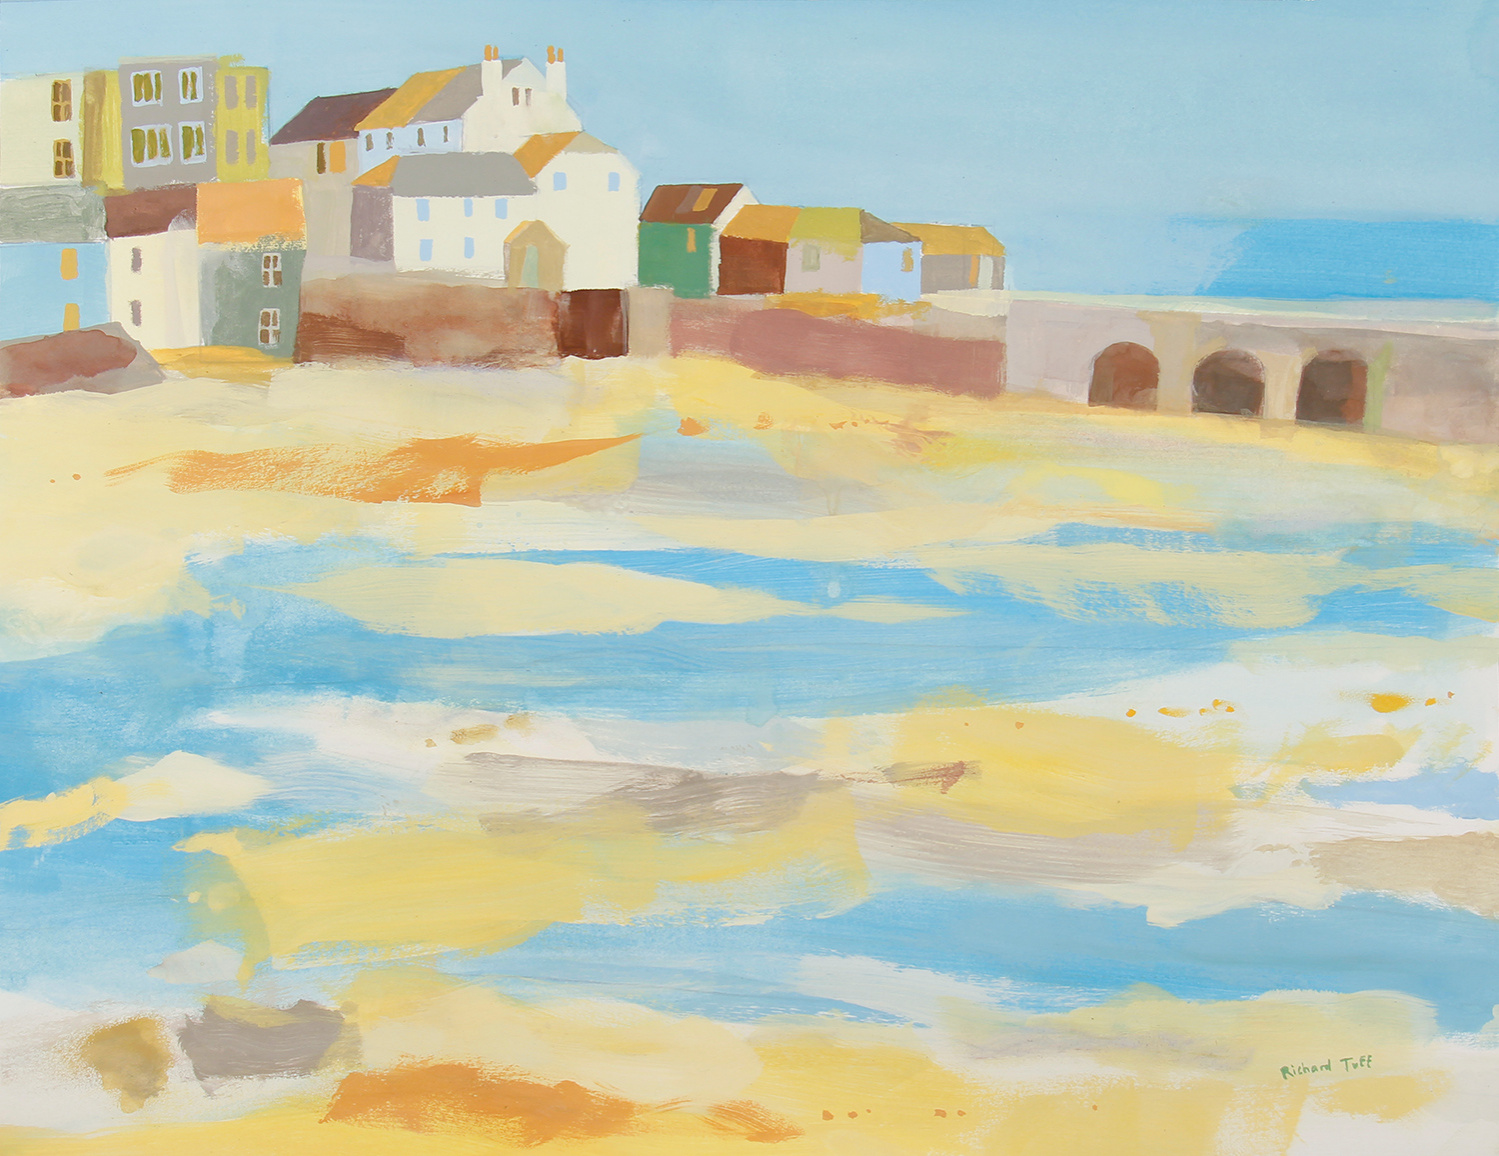 St Ives Low Tide by Richard Tuff